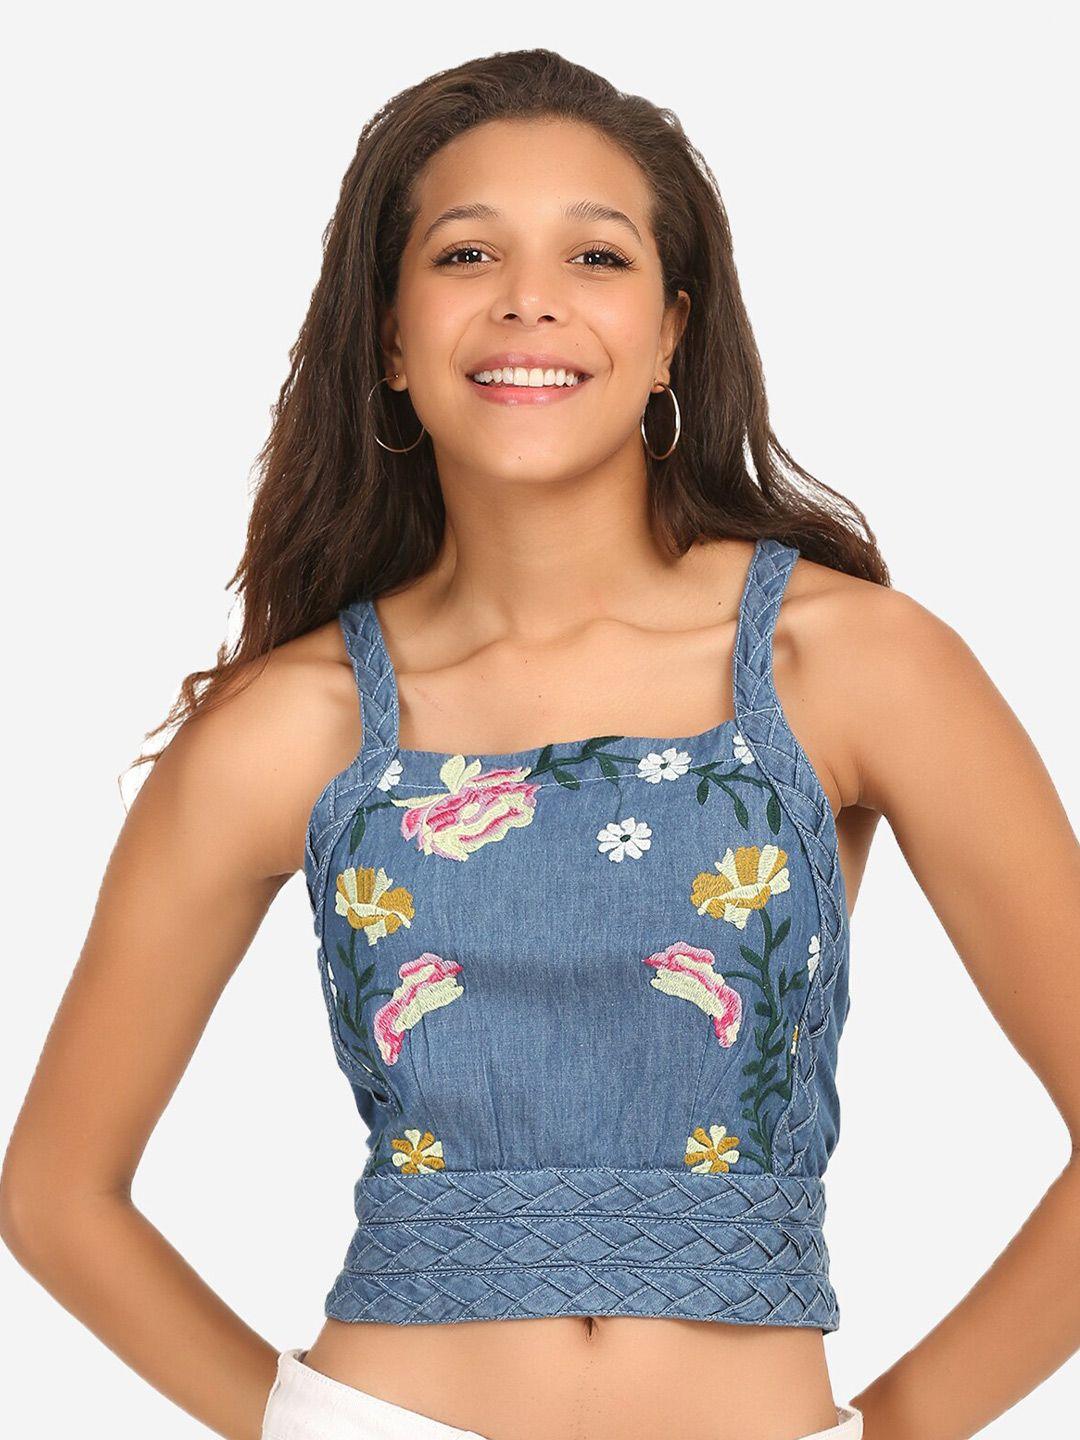 sumavi-fashion floral embroidered organic cotton denim crop fitted top